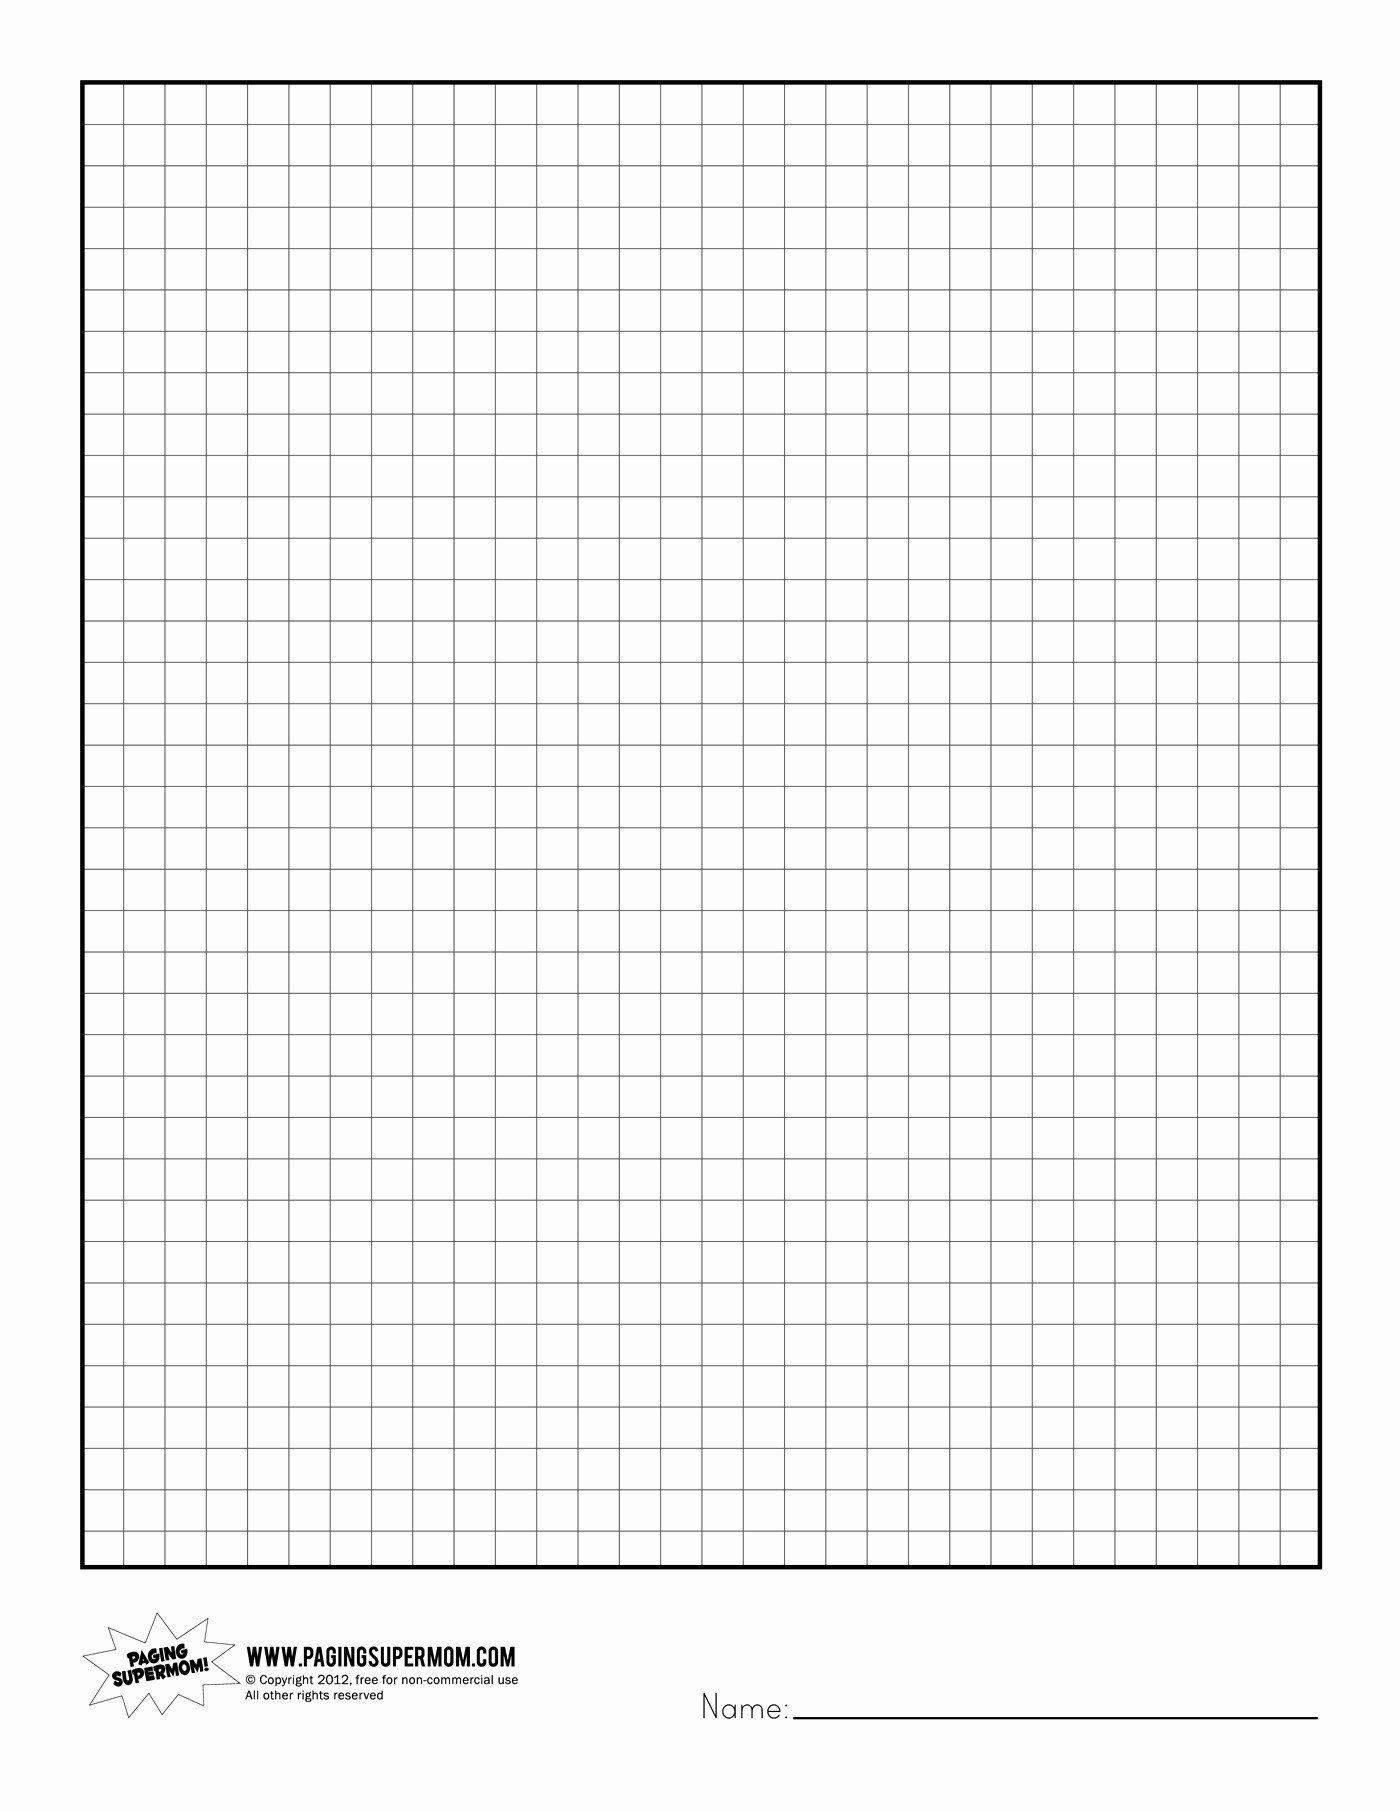 How To Print A Blank Excel Sheet With Gridlines Luxury Free Spreadsheet